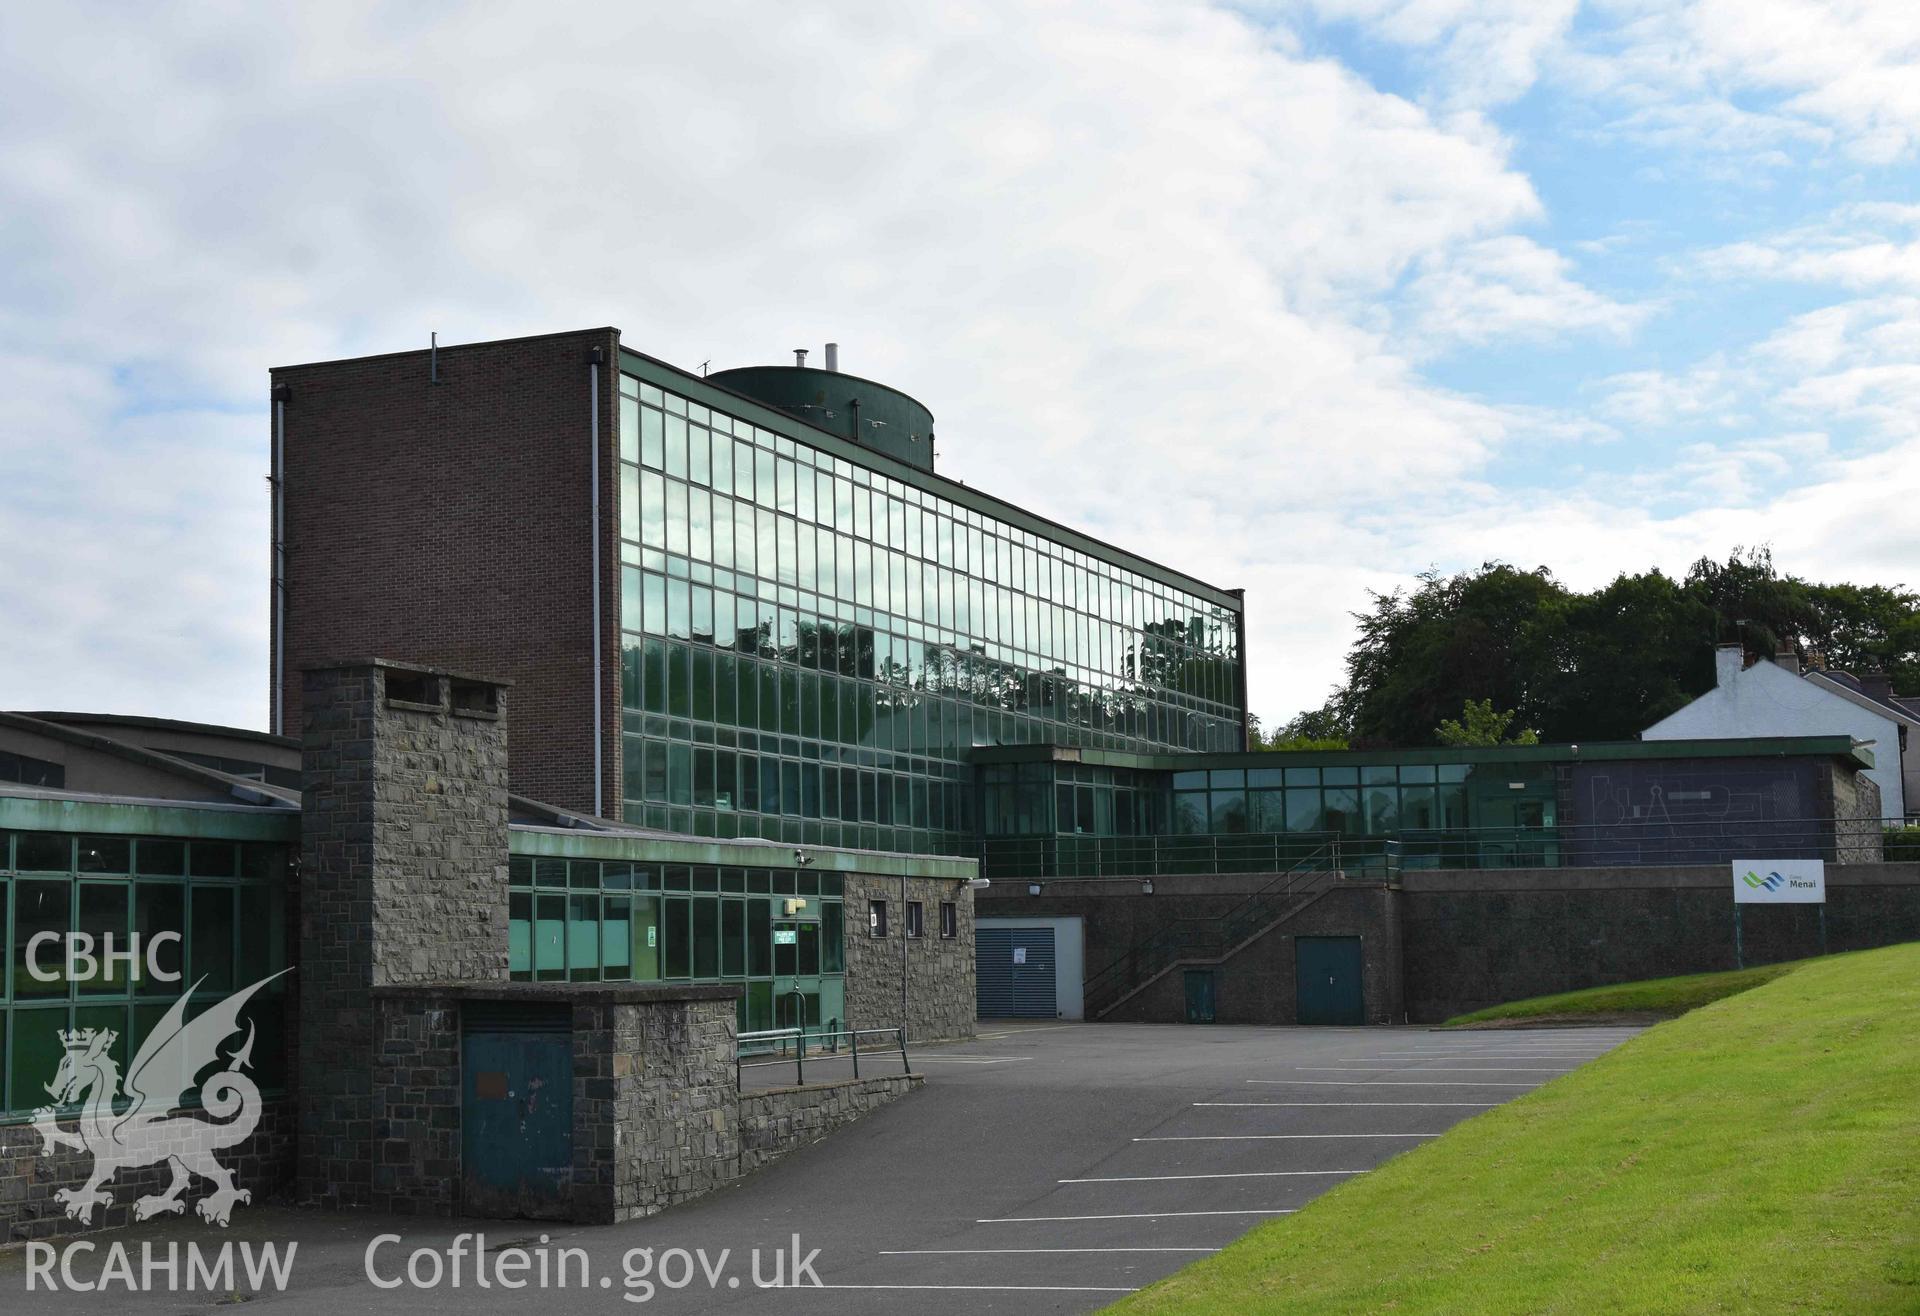 Digital colour photograph showing Caernarfonshire Technical College from the north-east, taken by Susan Fielding of RCAHMW 7 May 2019.